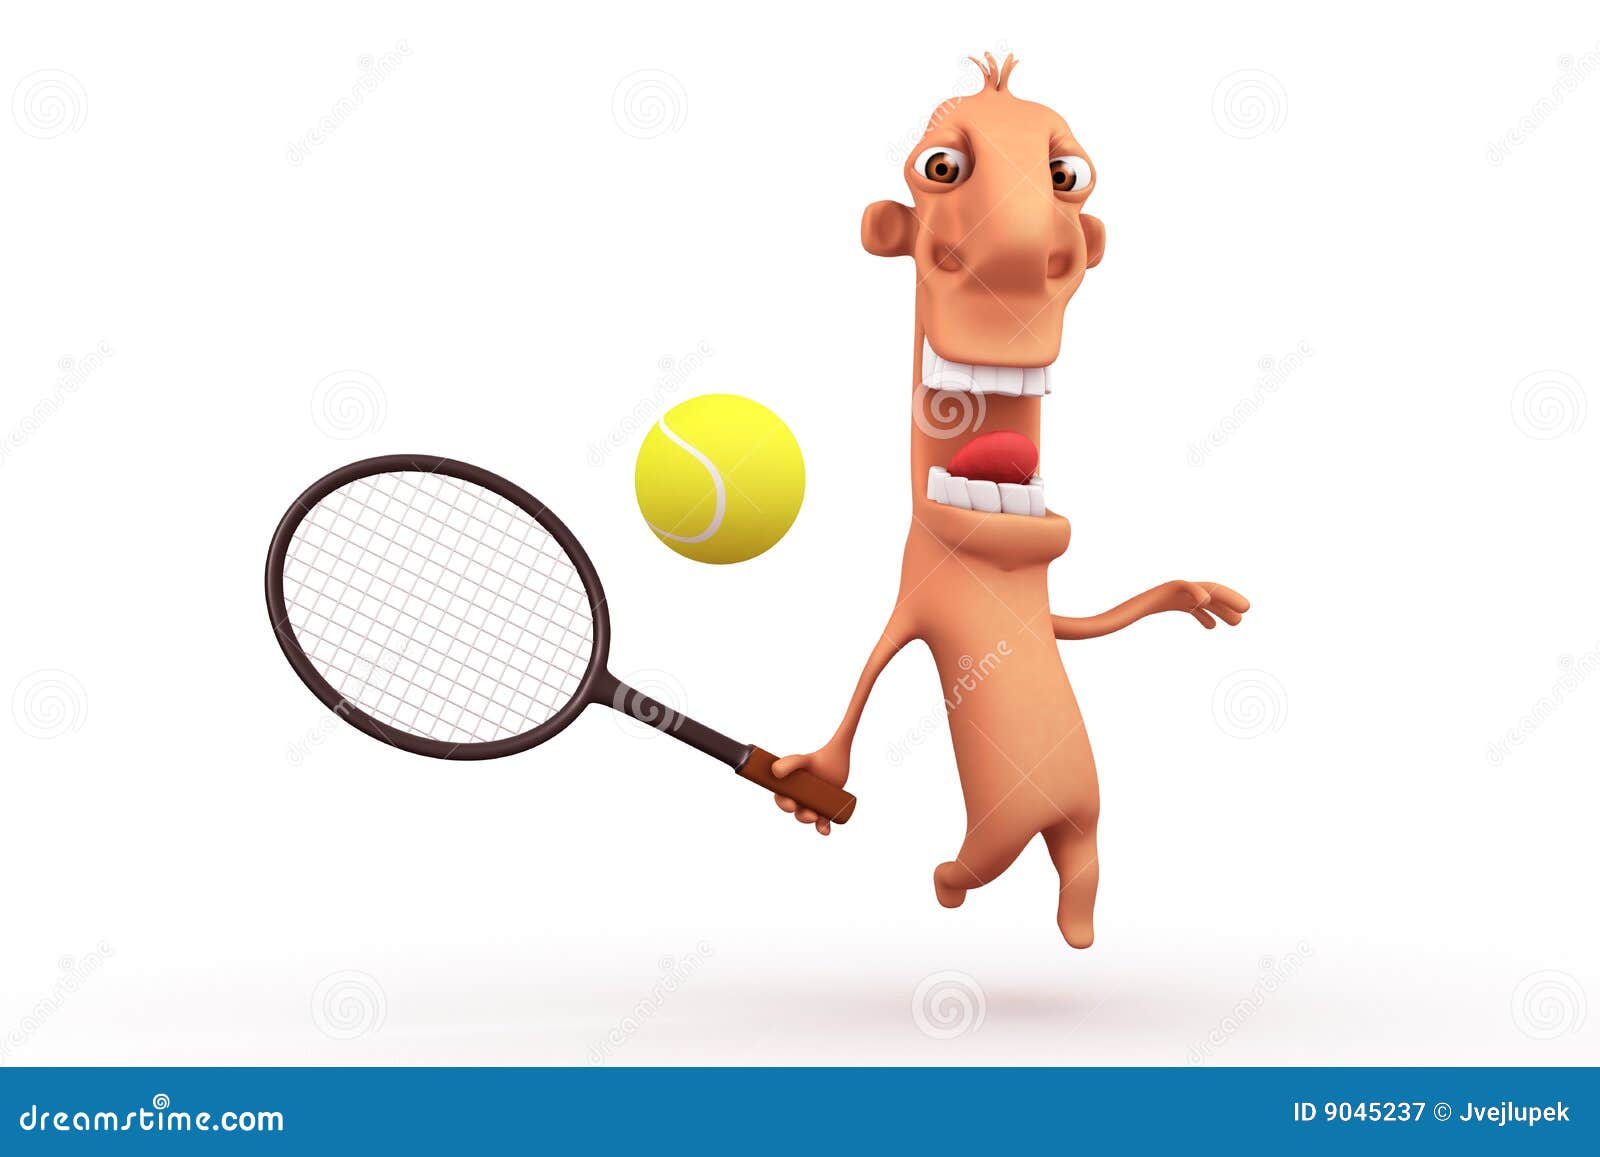 Funny Cartoon Tennis Player. Objects Over White Stock Illustration -  Illustration of player, agility: 9045237